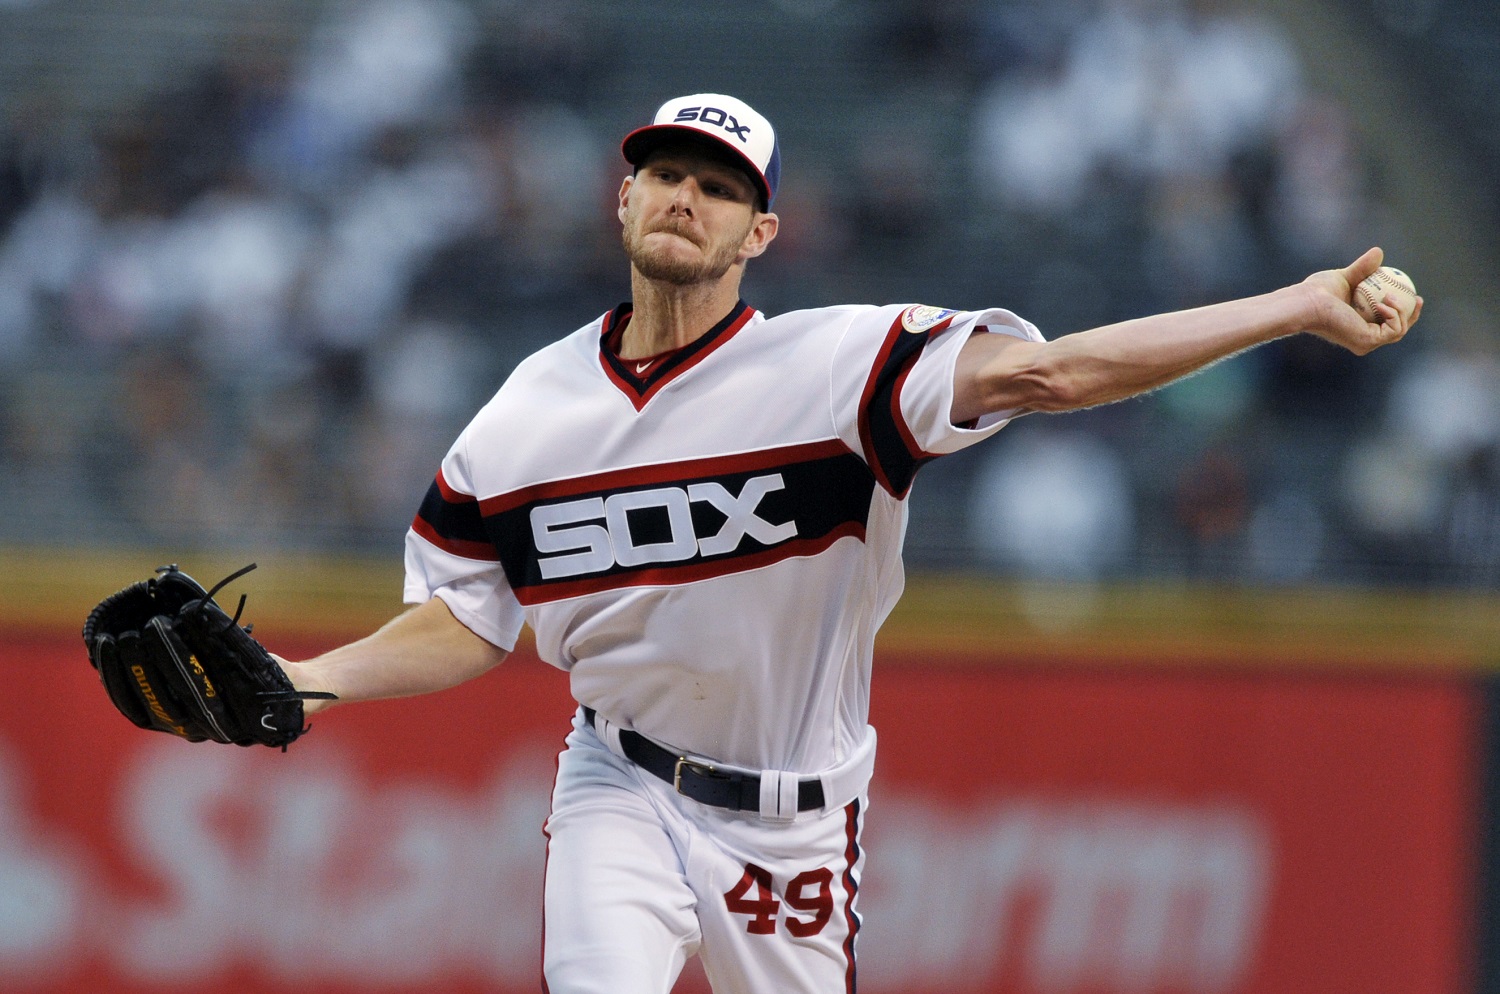 Chicago White Sox starter Chris Sale delivers a pitch during the first inning of a baseball game against the Minnesota Twins, Sunday, Oct. 2, 2016, in Chicago. (AP Photo/Paul Beaty)